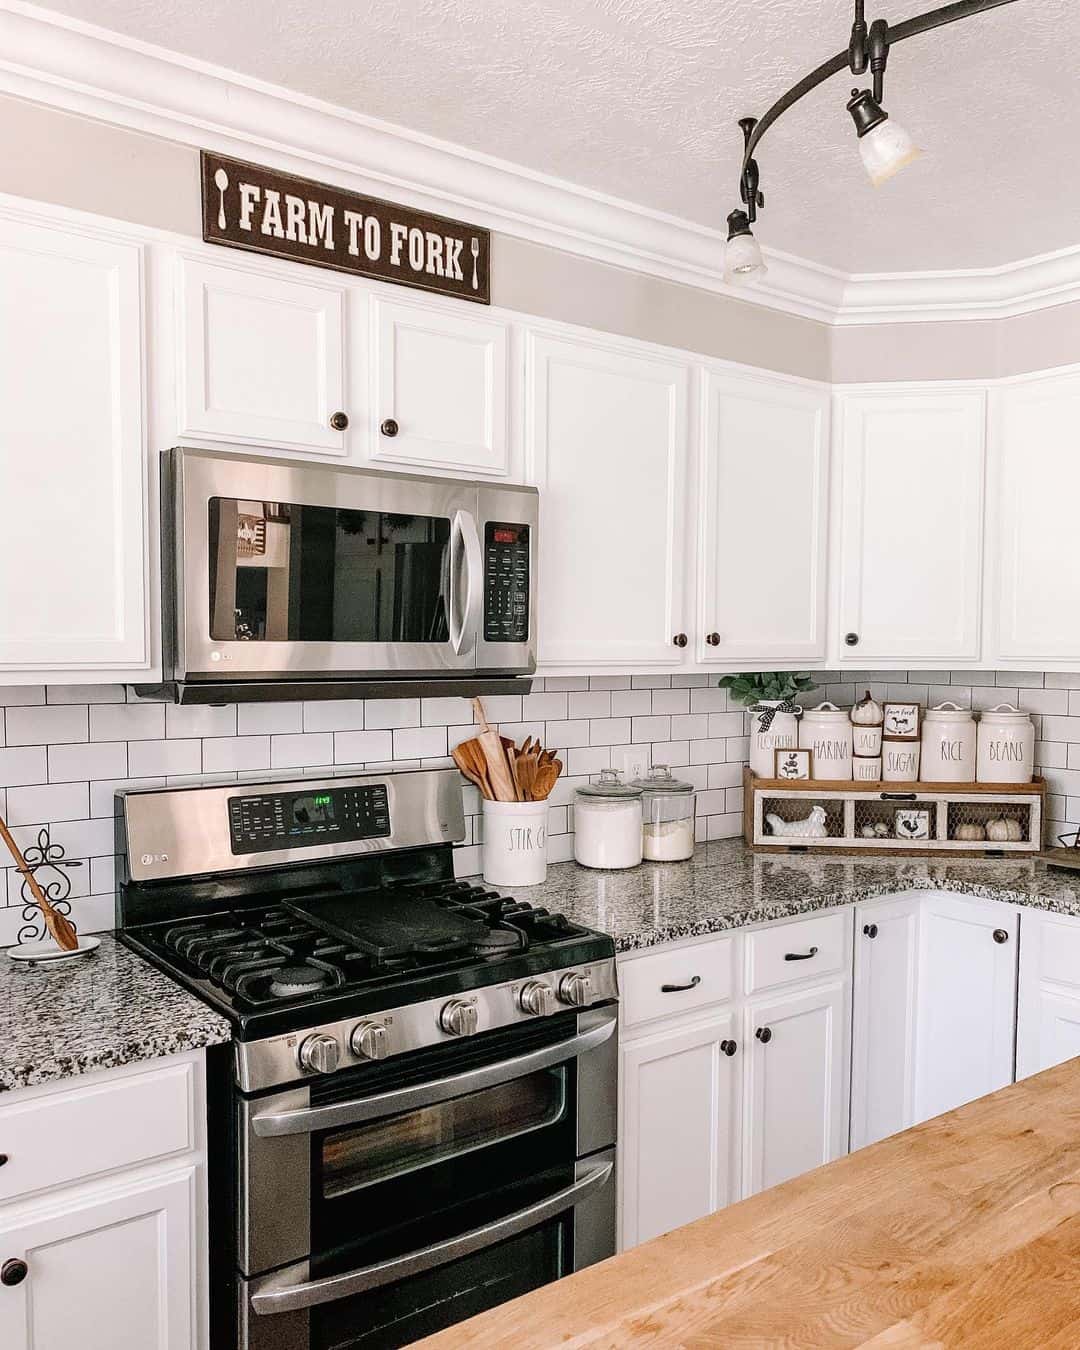 Stainless Steel Appliances with White Subway Tiles